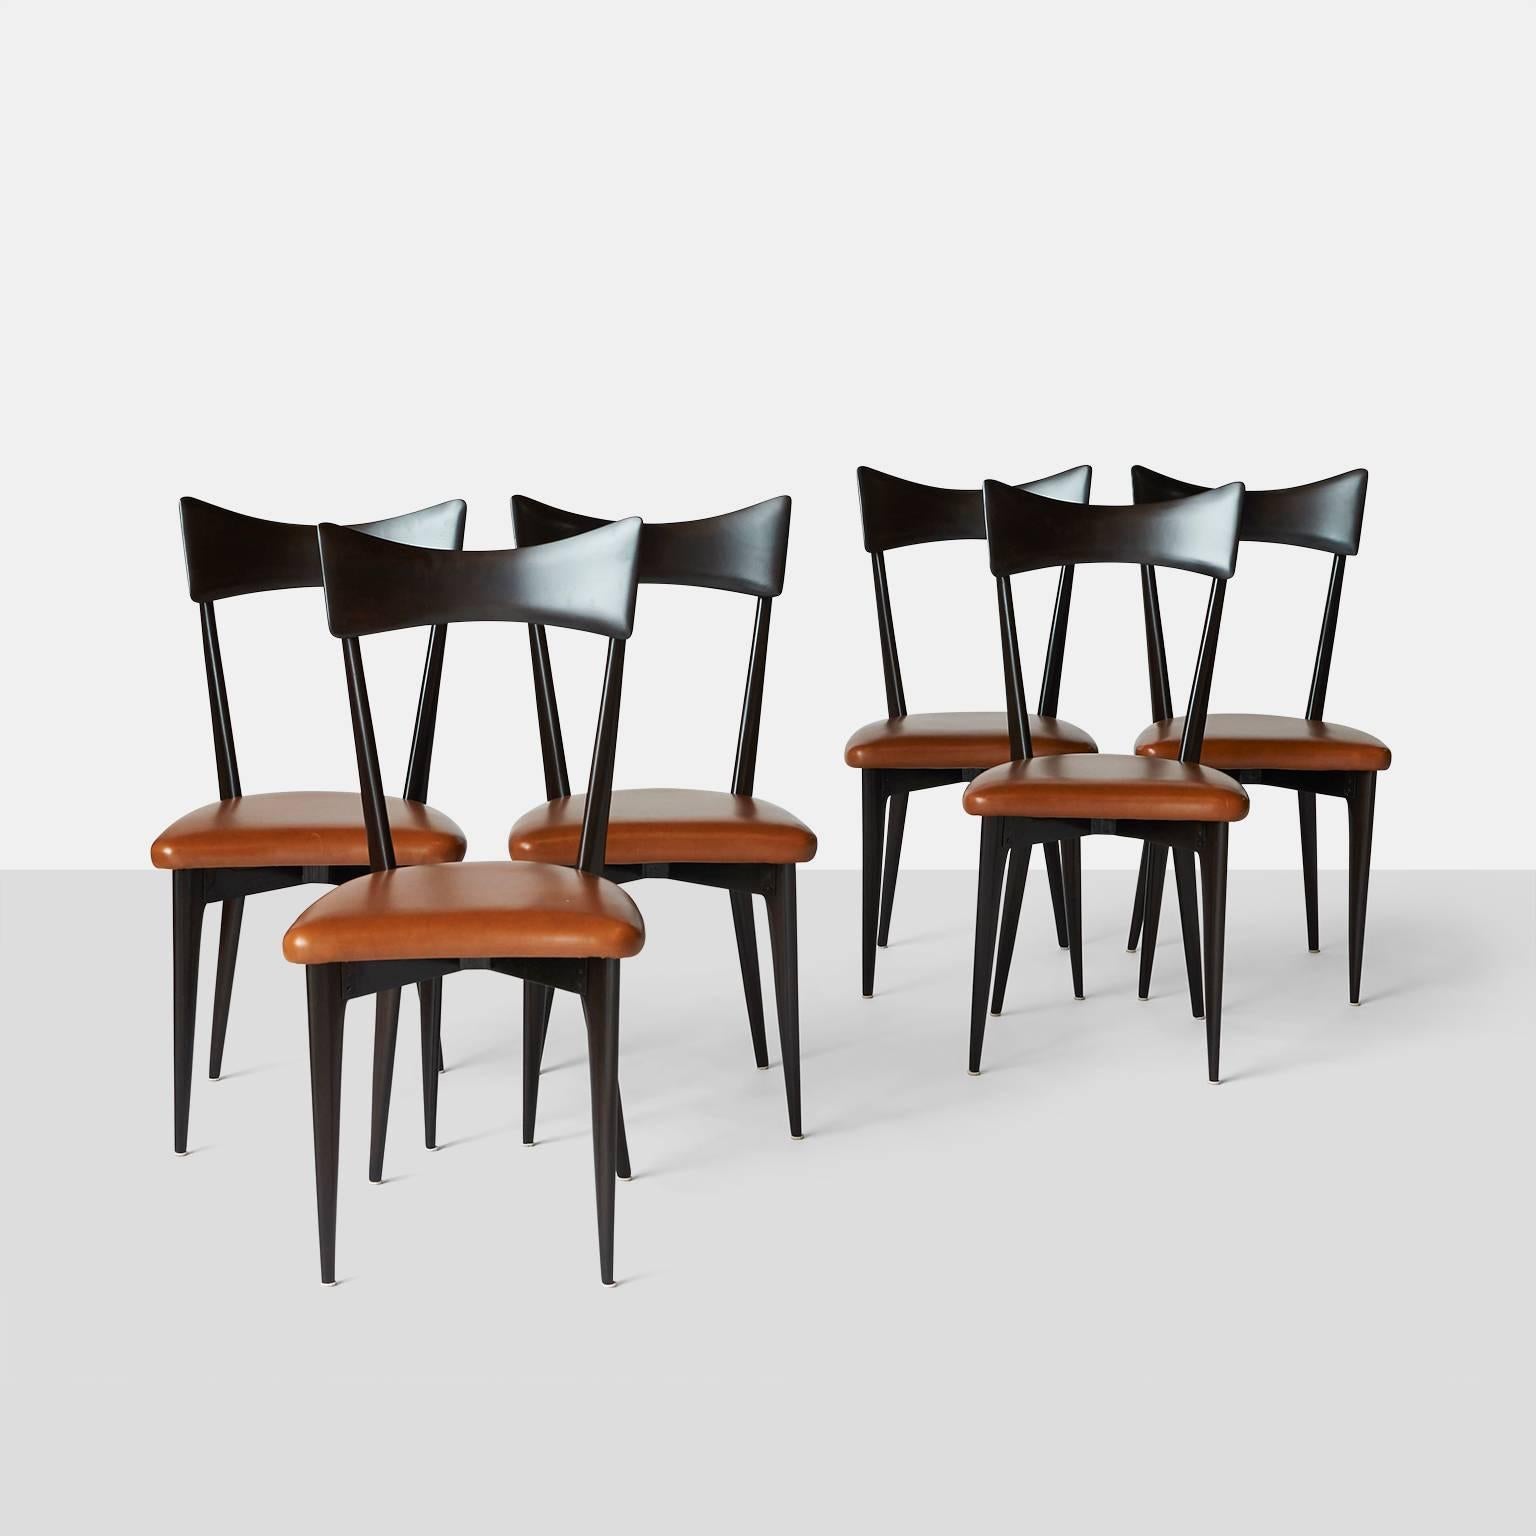 A set of six side chairs by Ico Parisi circa 1950 Italy made for Ariberto Colombo. Each chair is made in walnut with a blackened finish and maple color vinyl covered seat.

